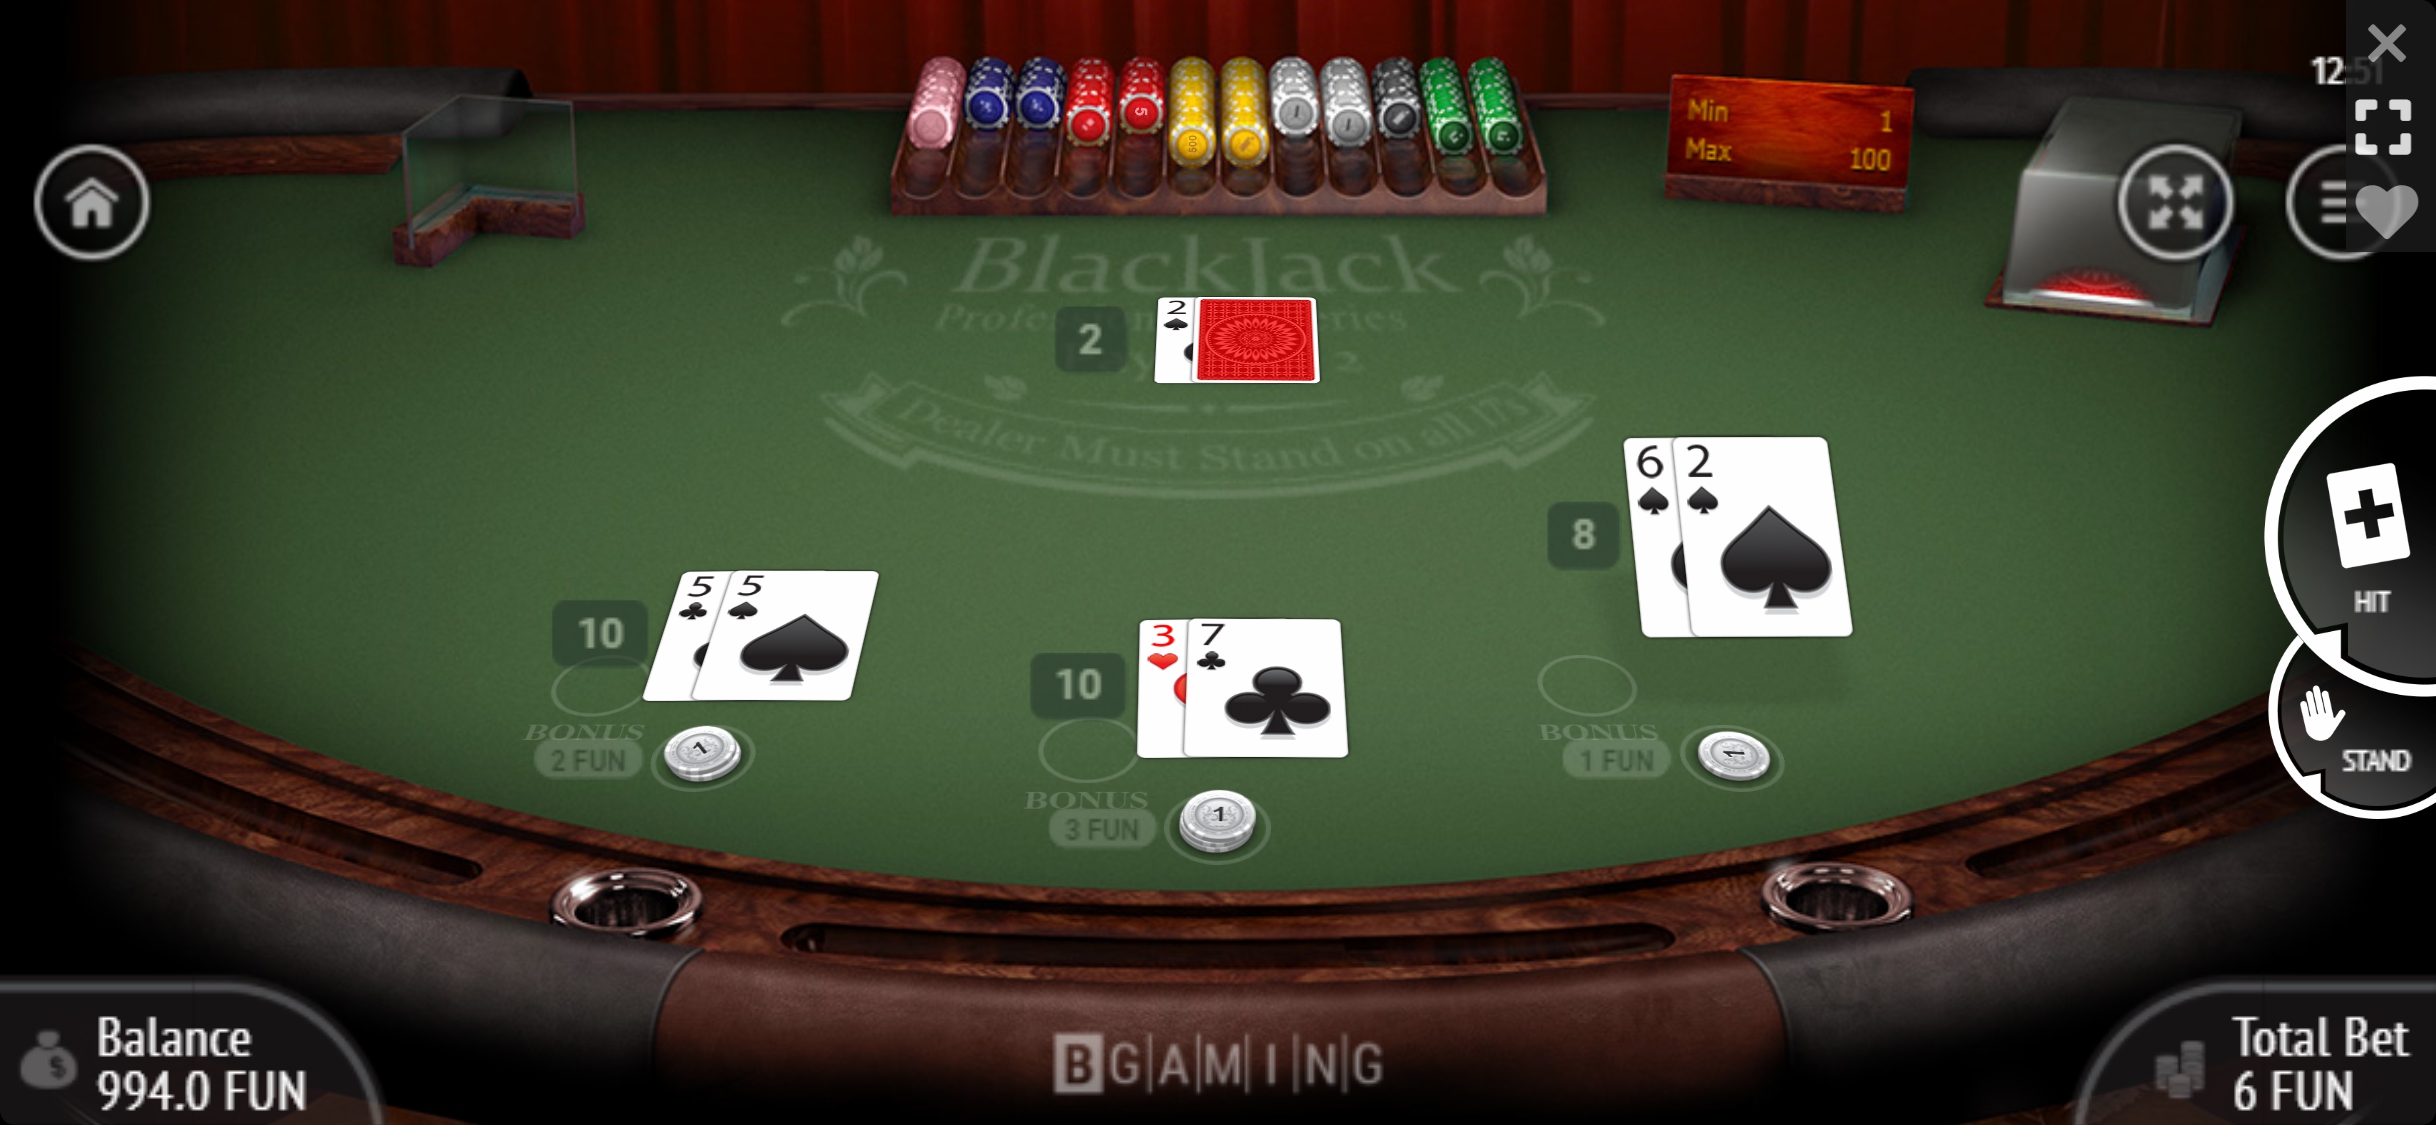 Play 24 Bet Casino Mobile Slots Review